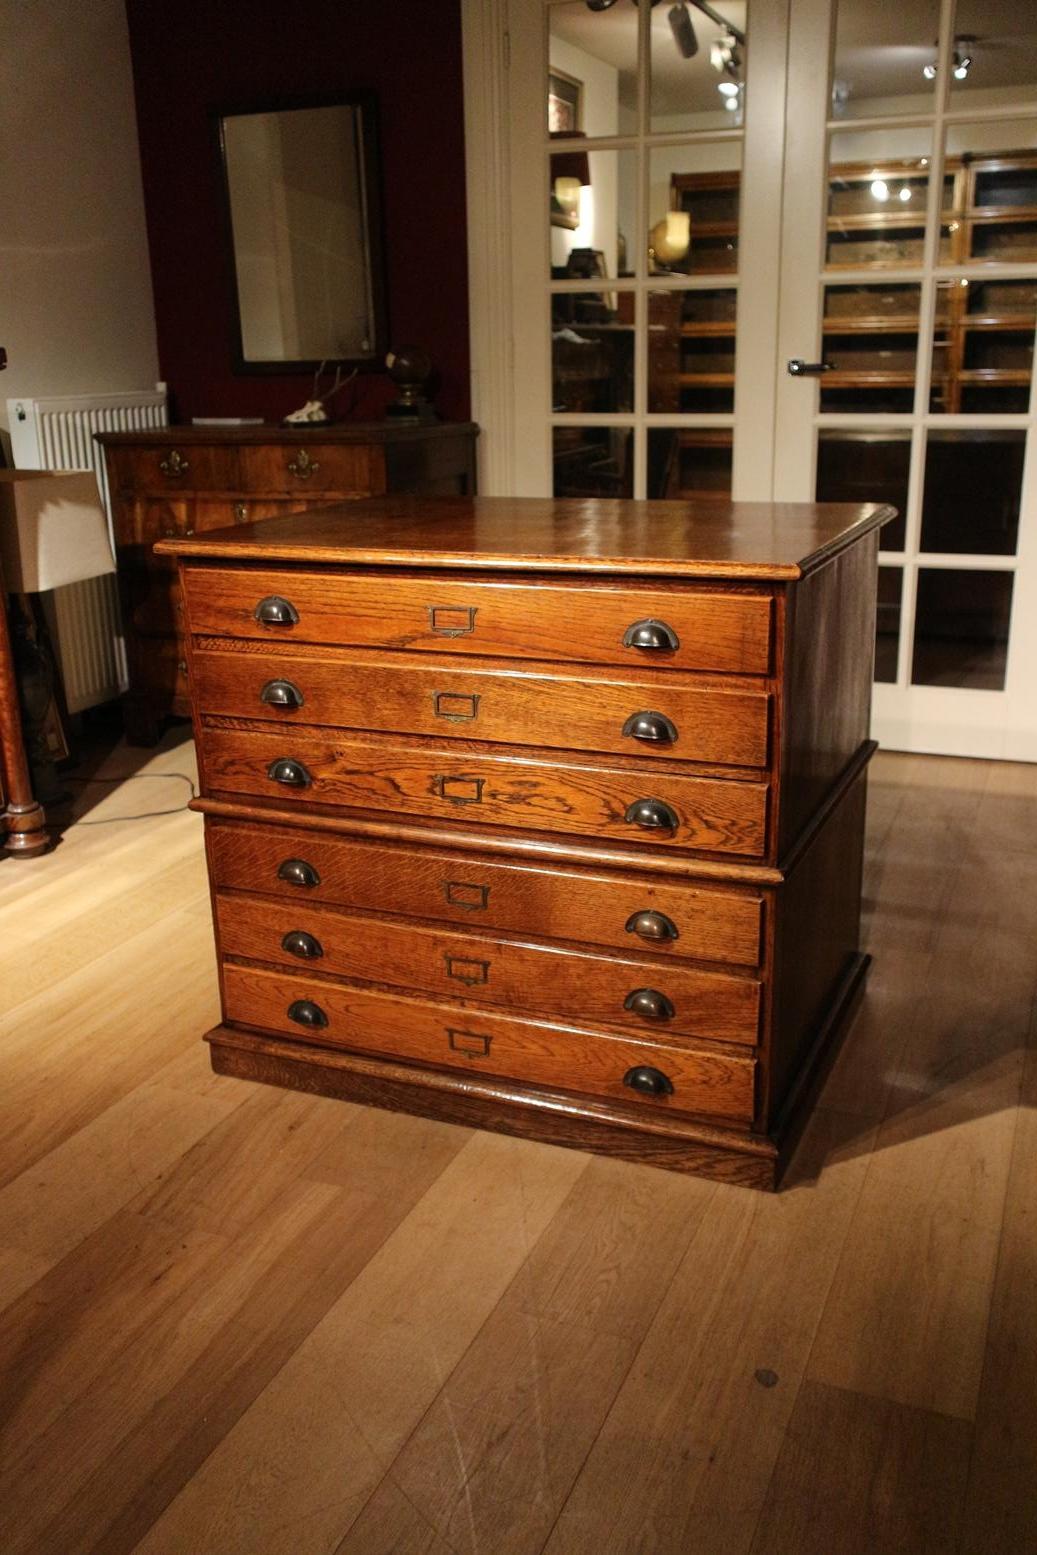 Old oak chest of drawers especially for maps and/o drawings. Cabinet consists of 2 parts. Entirely in perfect condition.
Origin: England
Period: Approx. 1940
Size 95cm x 68cm x H.88cm.